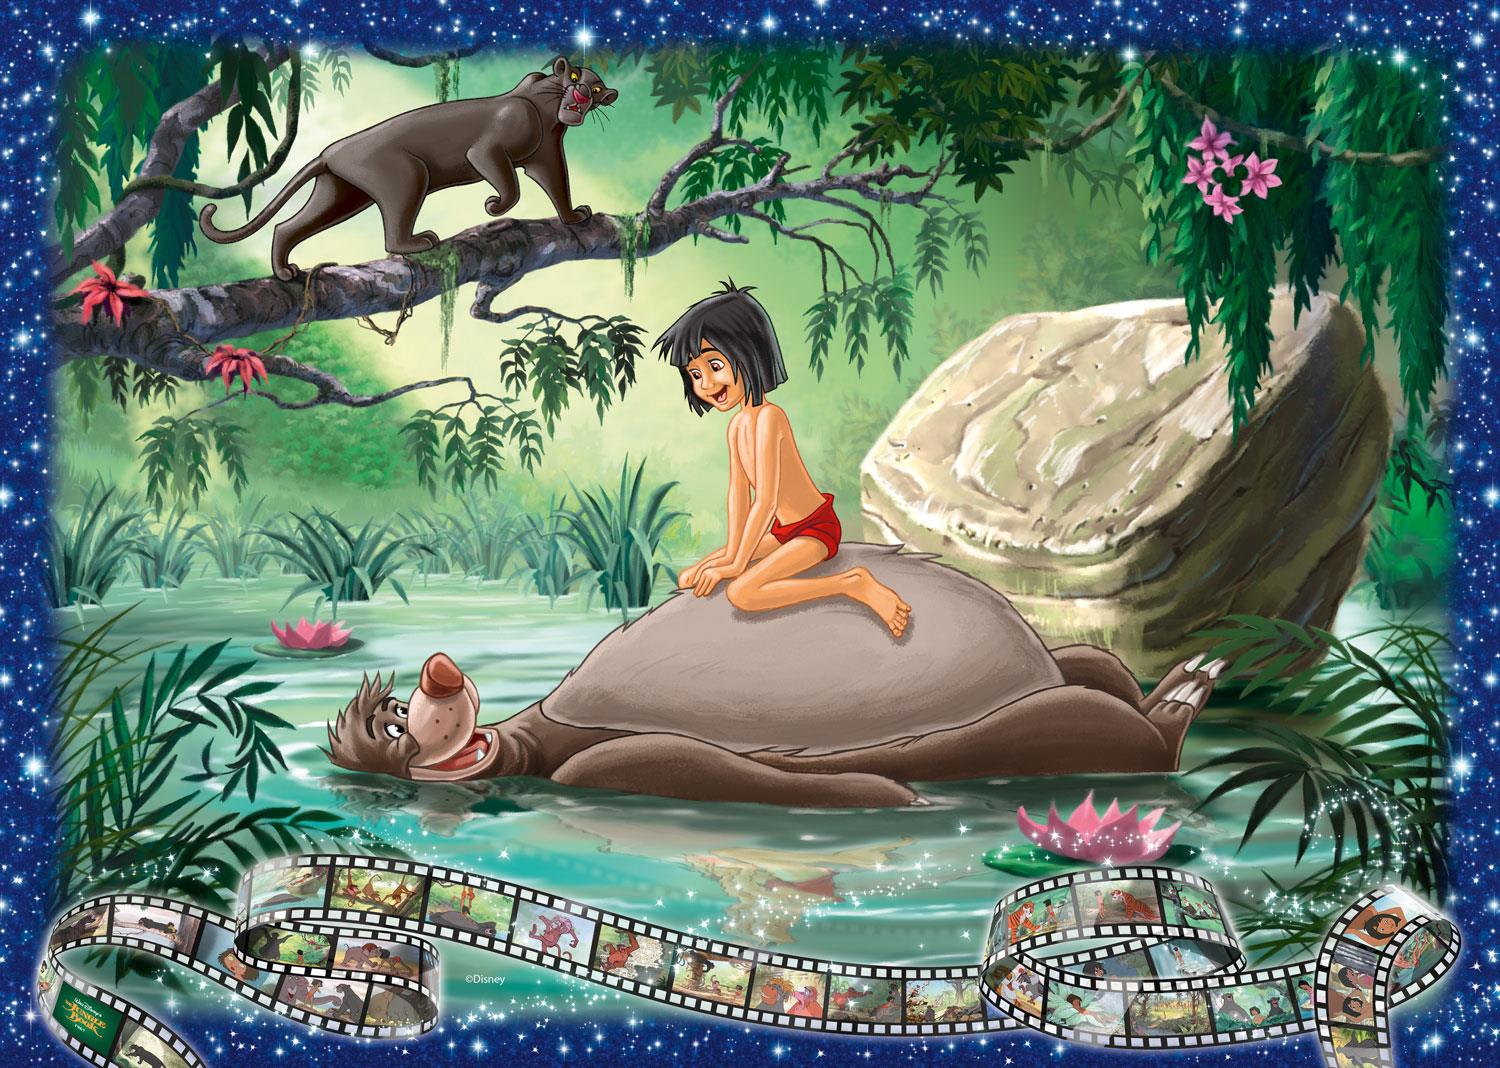 Ravensburger Disney Collector's Edition Jungle Book Jigsaw Puzzle (1000 Pieces)